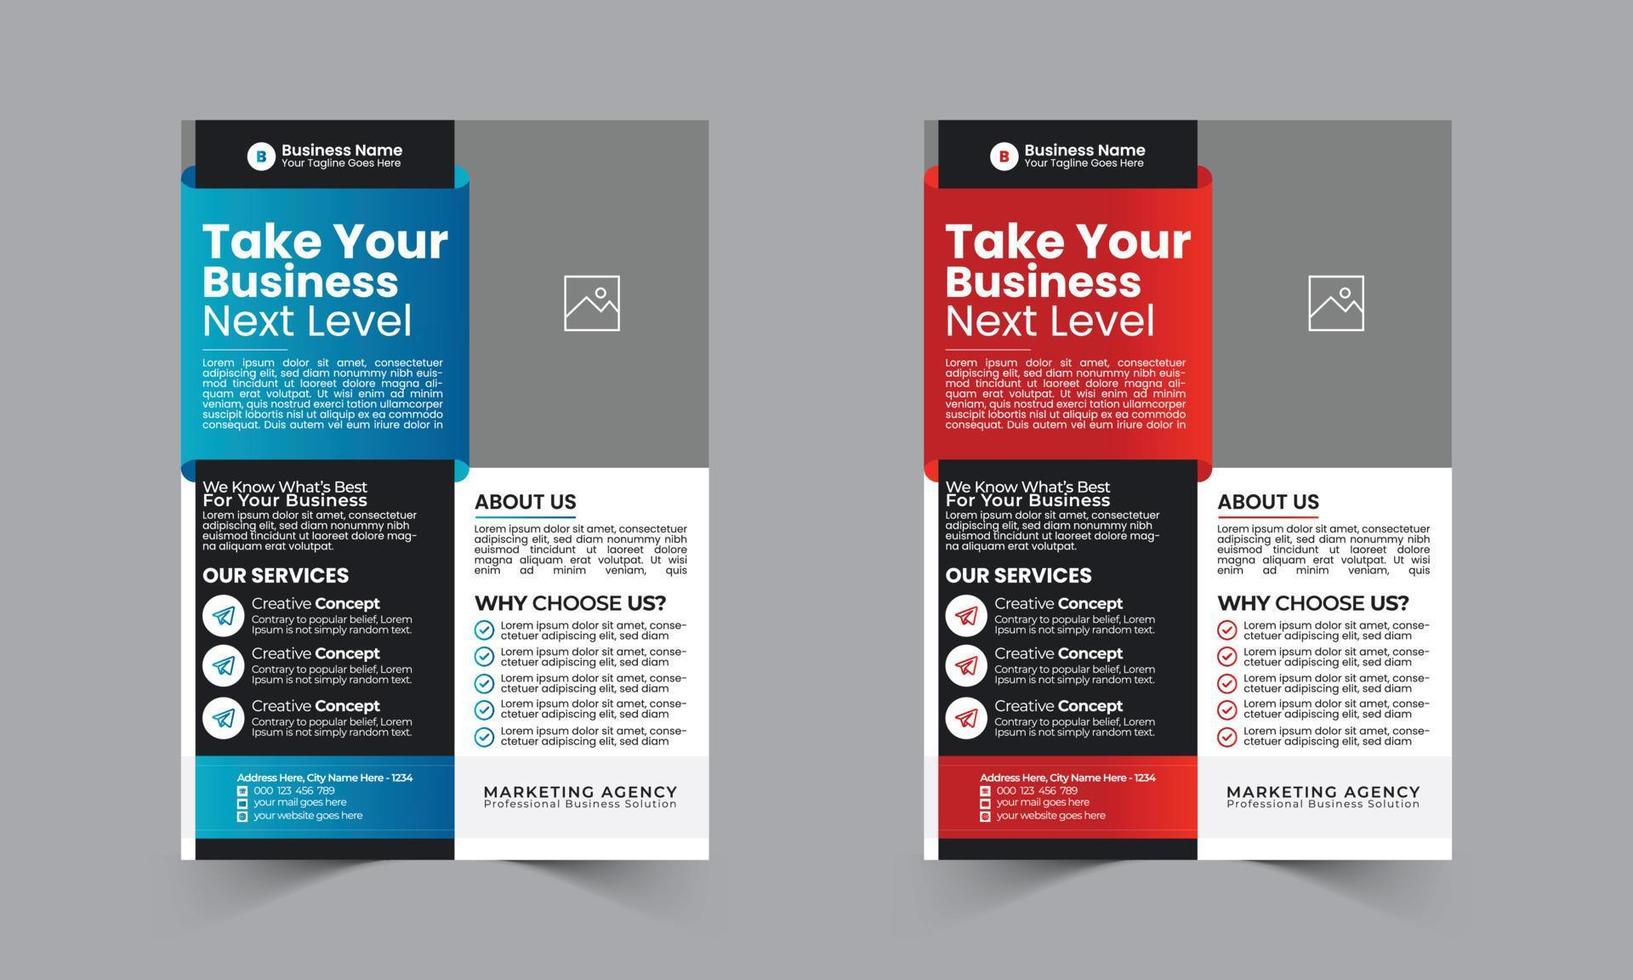 A4 size vertical corporate flyer or banner template design for your brand or company with creative, eye catching, professional and modern shape vector